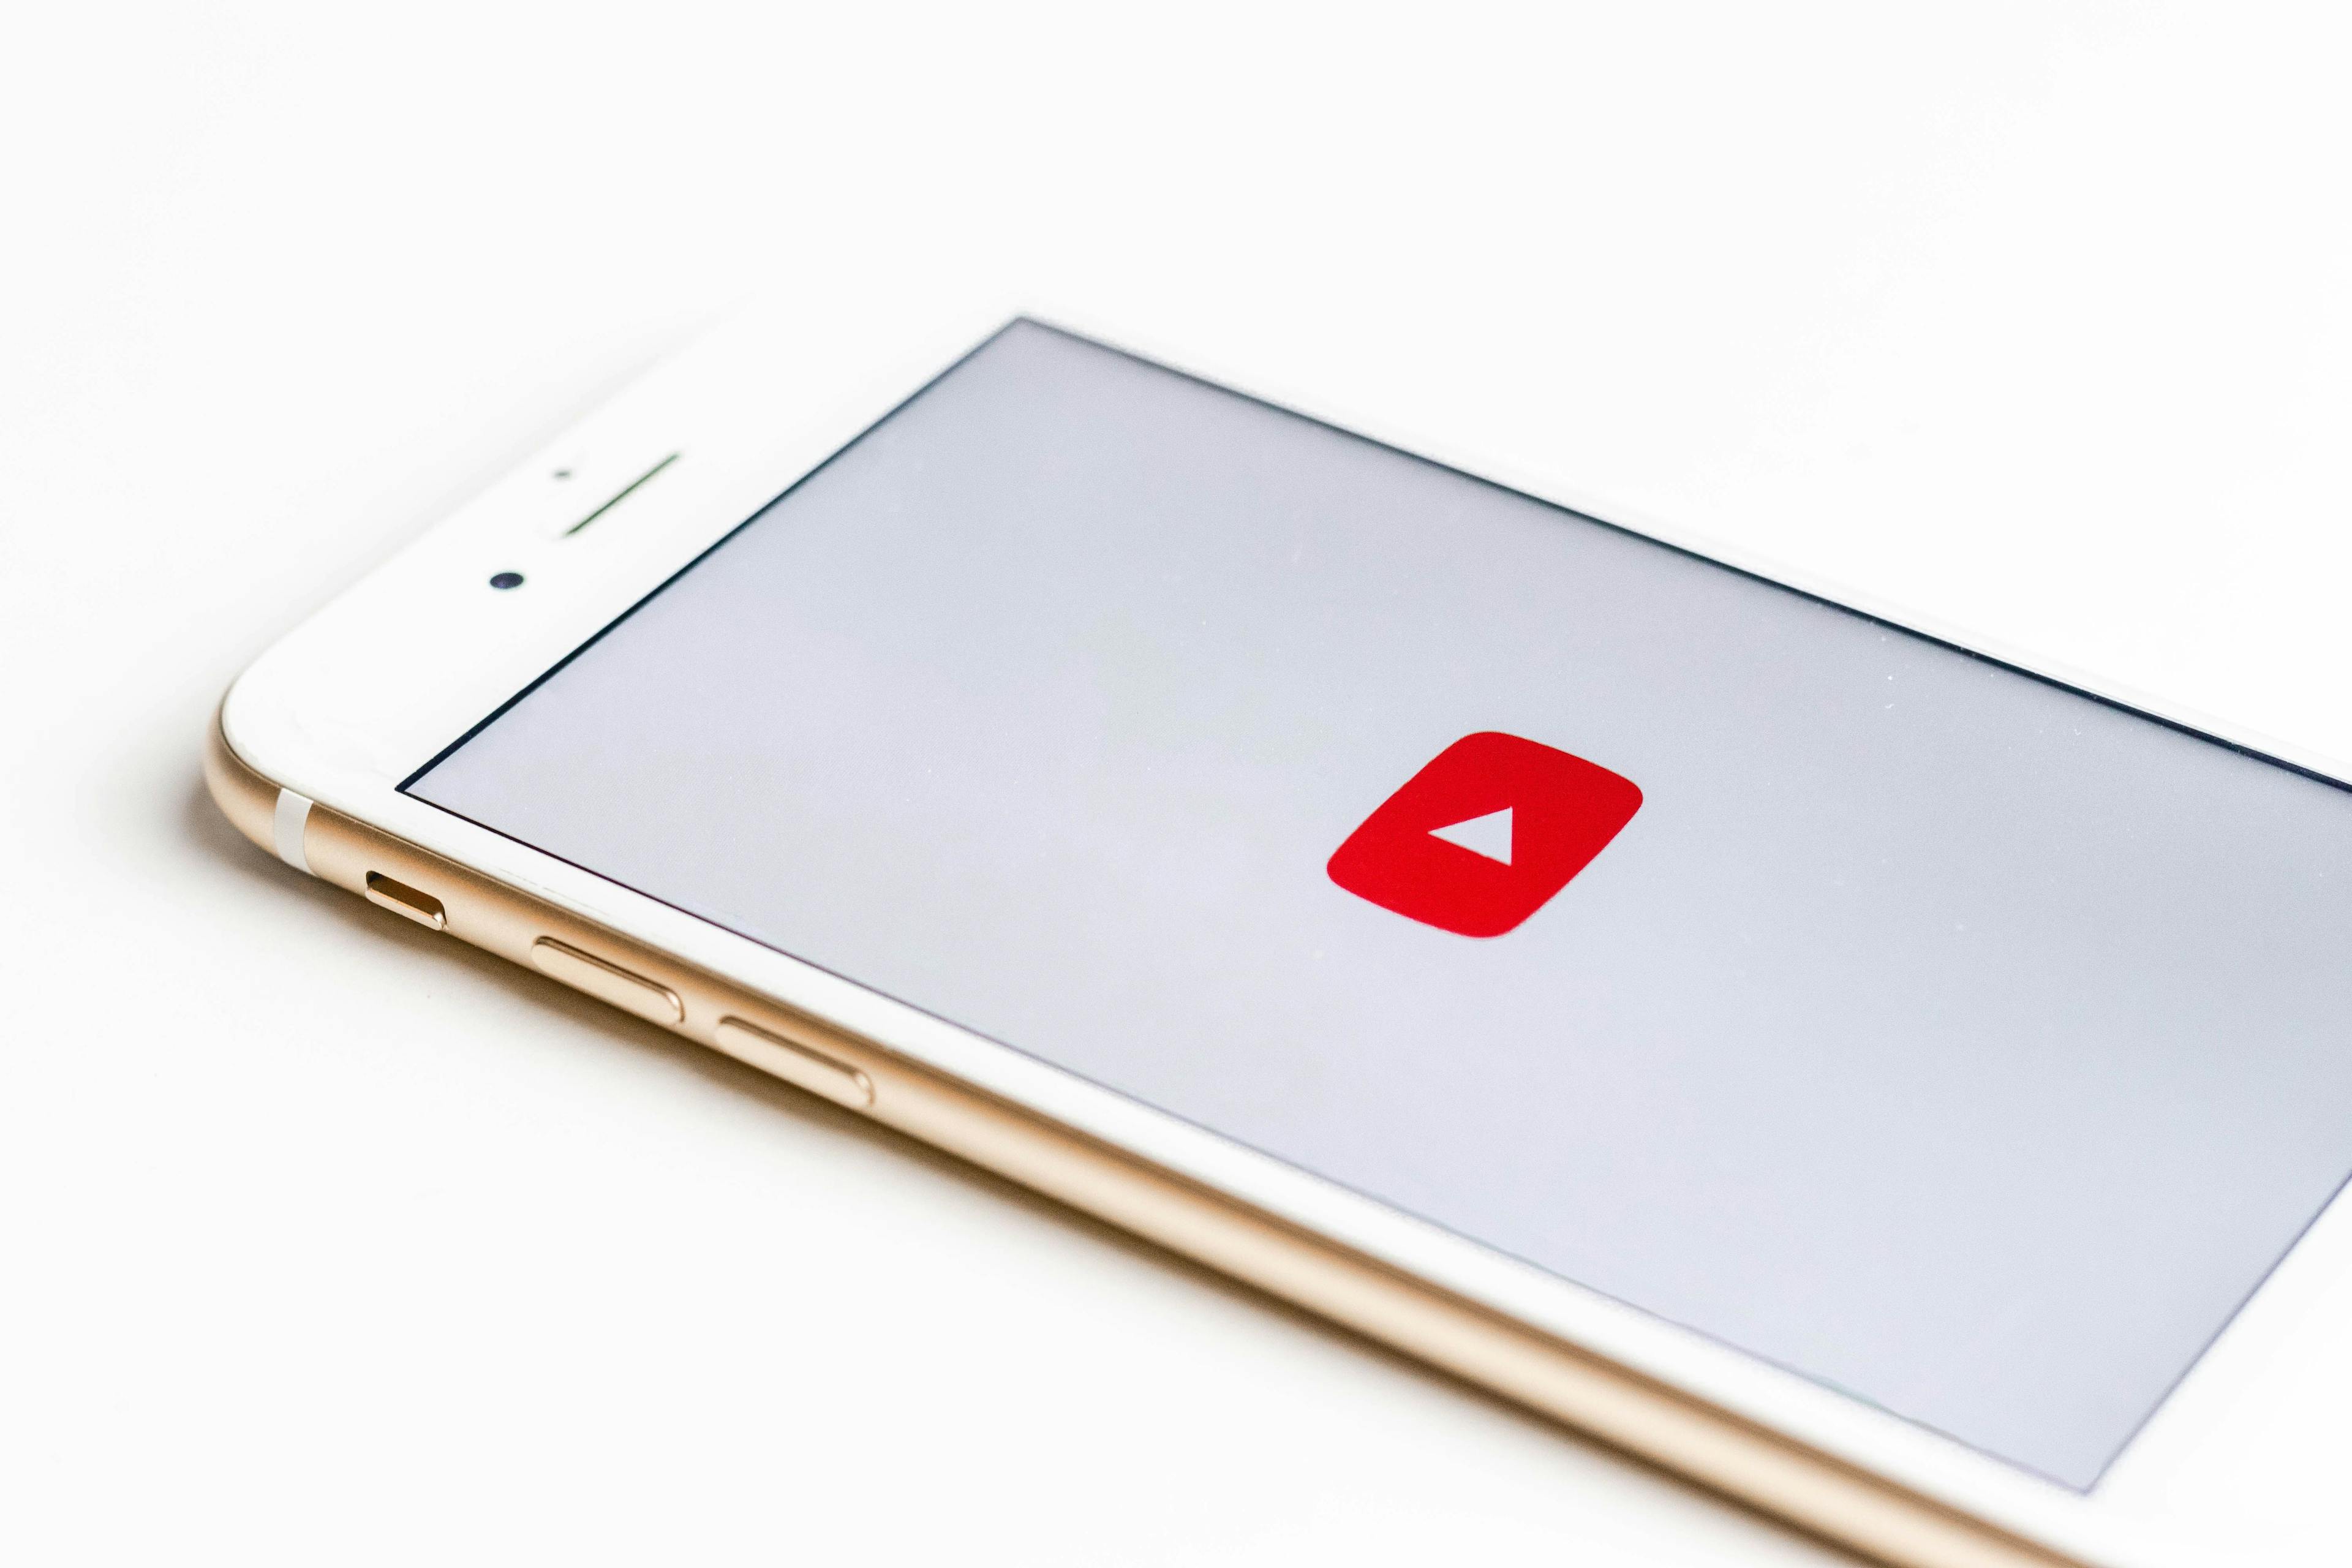 YouTube May Provide Misleading Information About Bladder Cancer